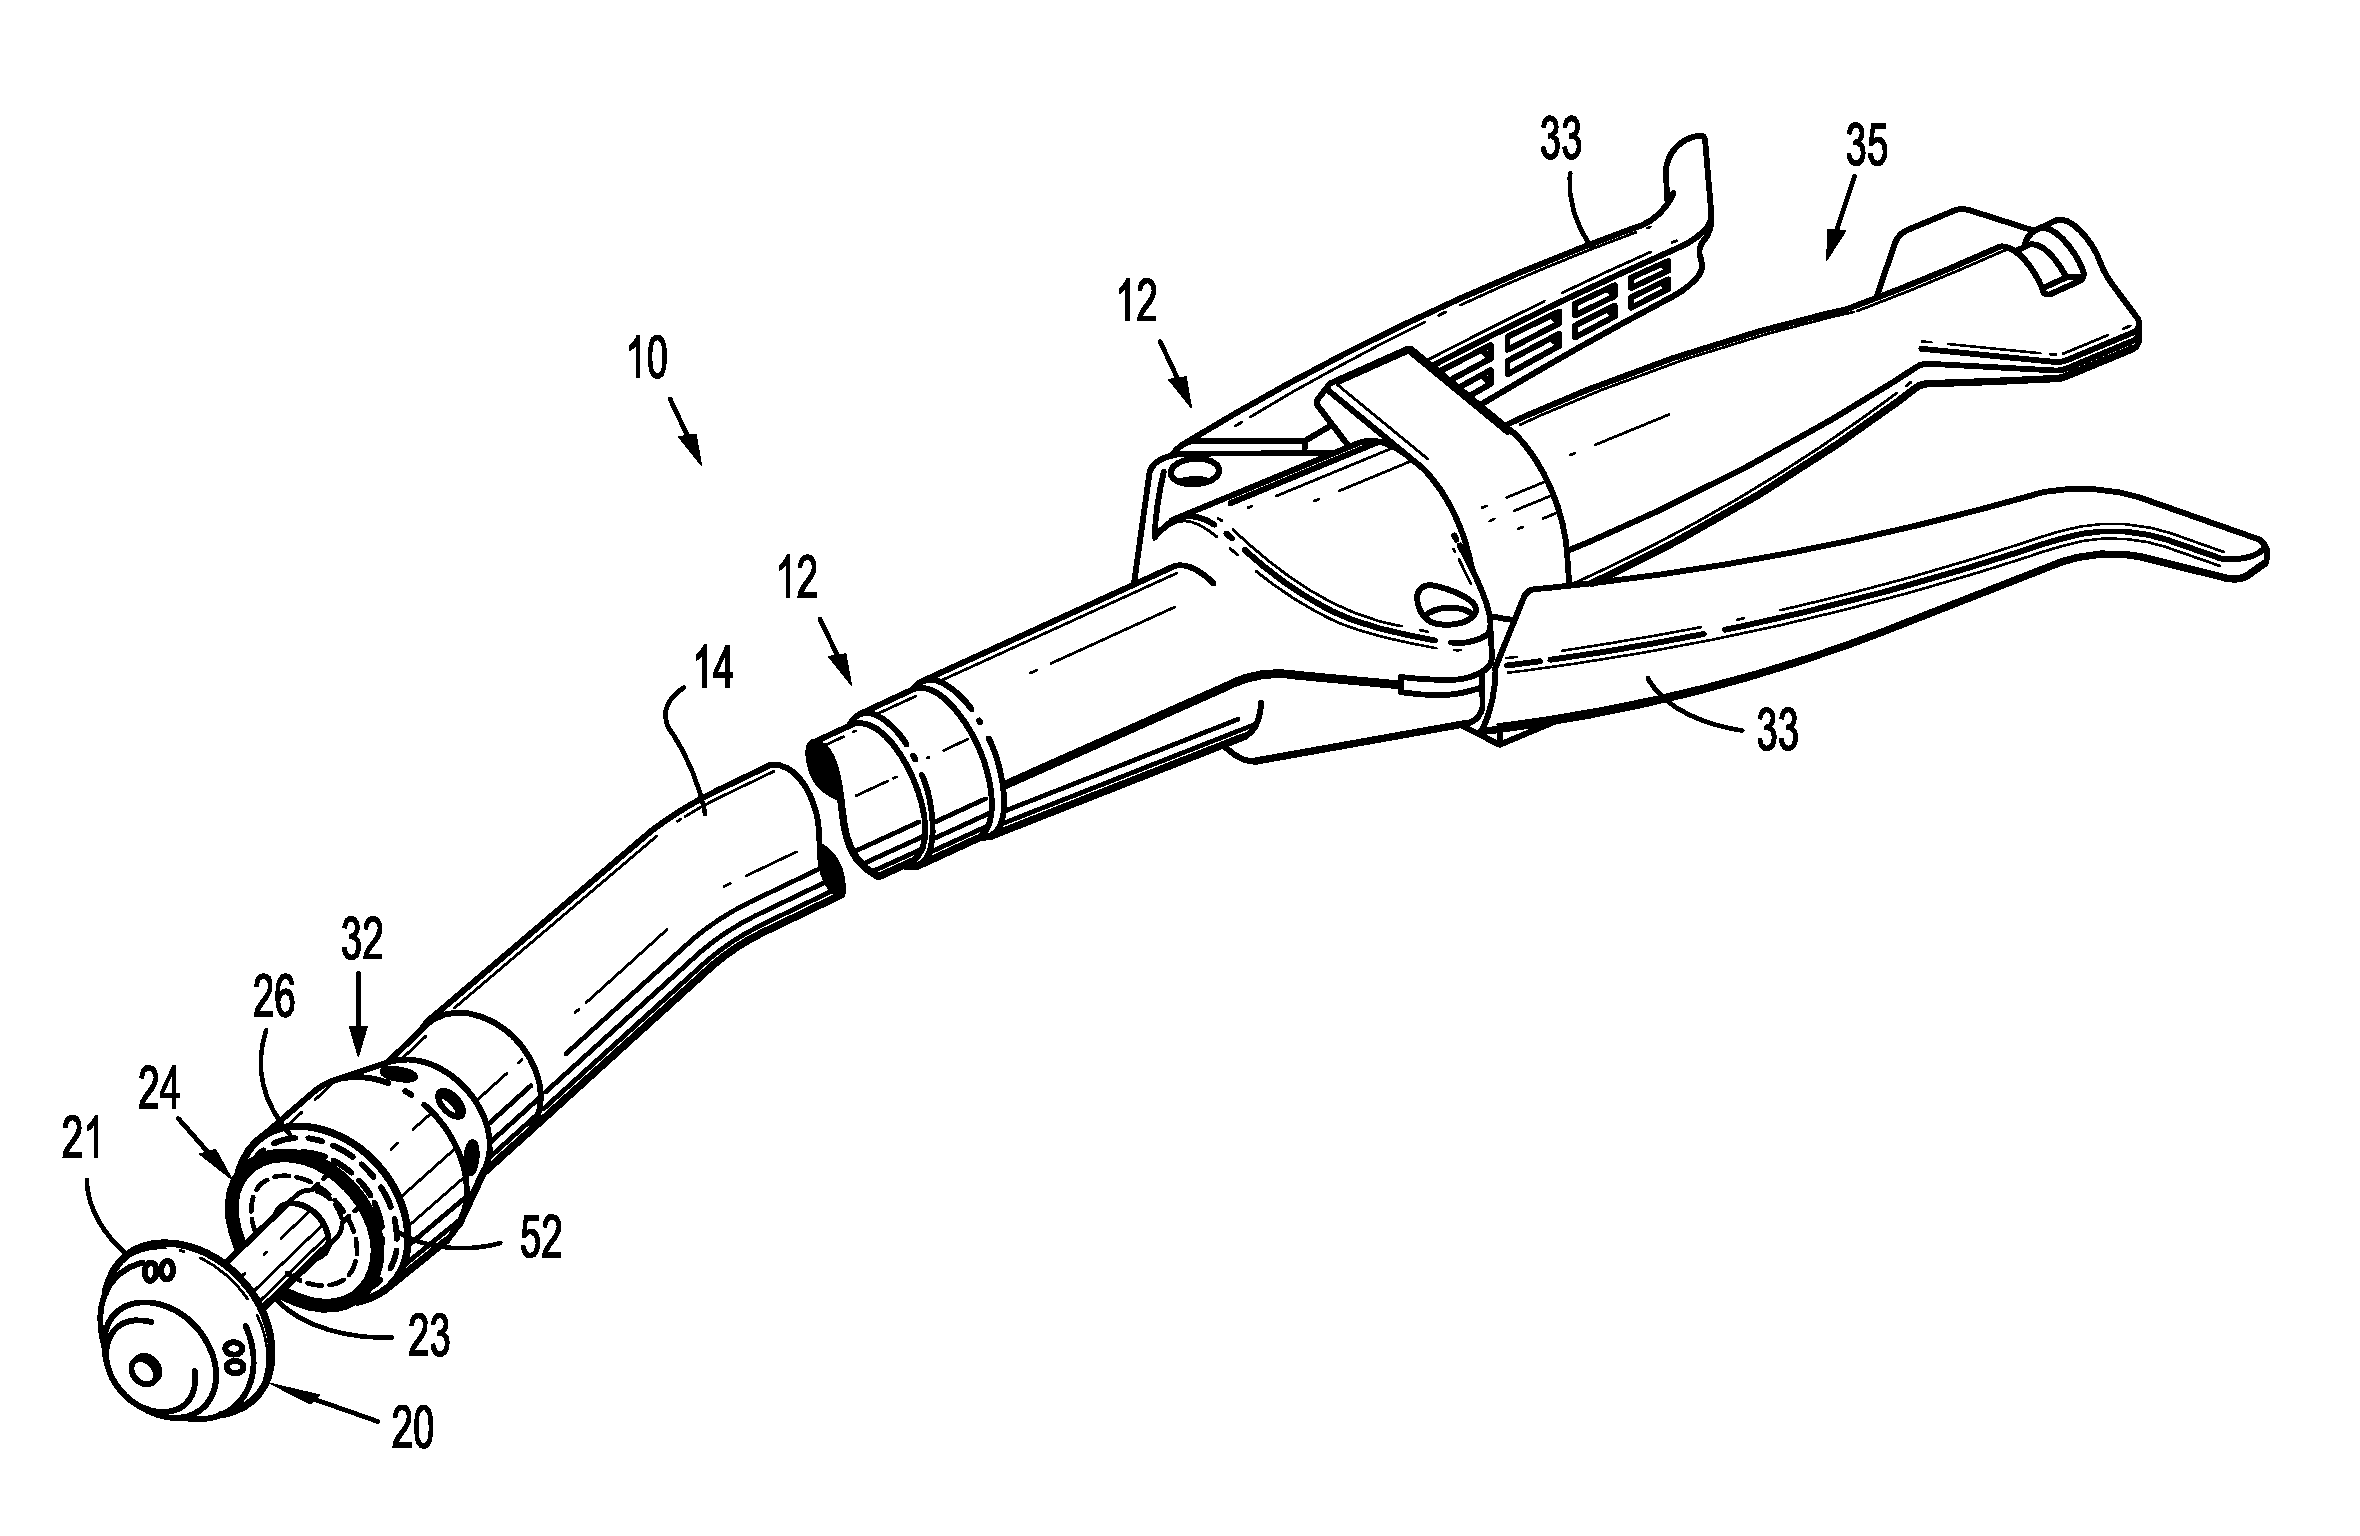 Surgical stapling apparatus including releasable surgical buttress